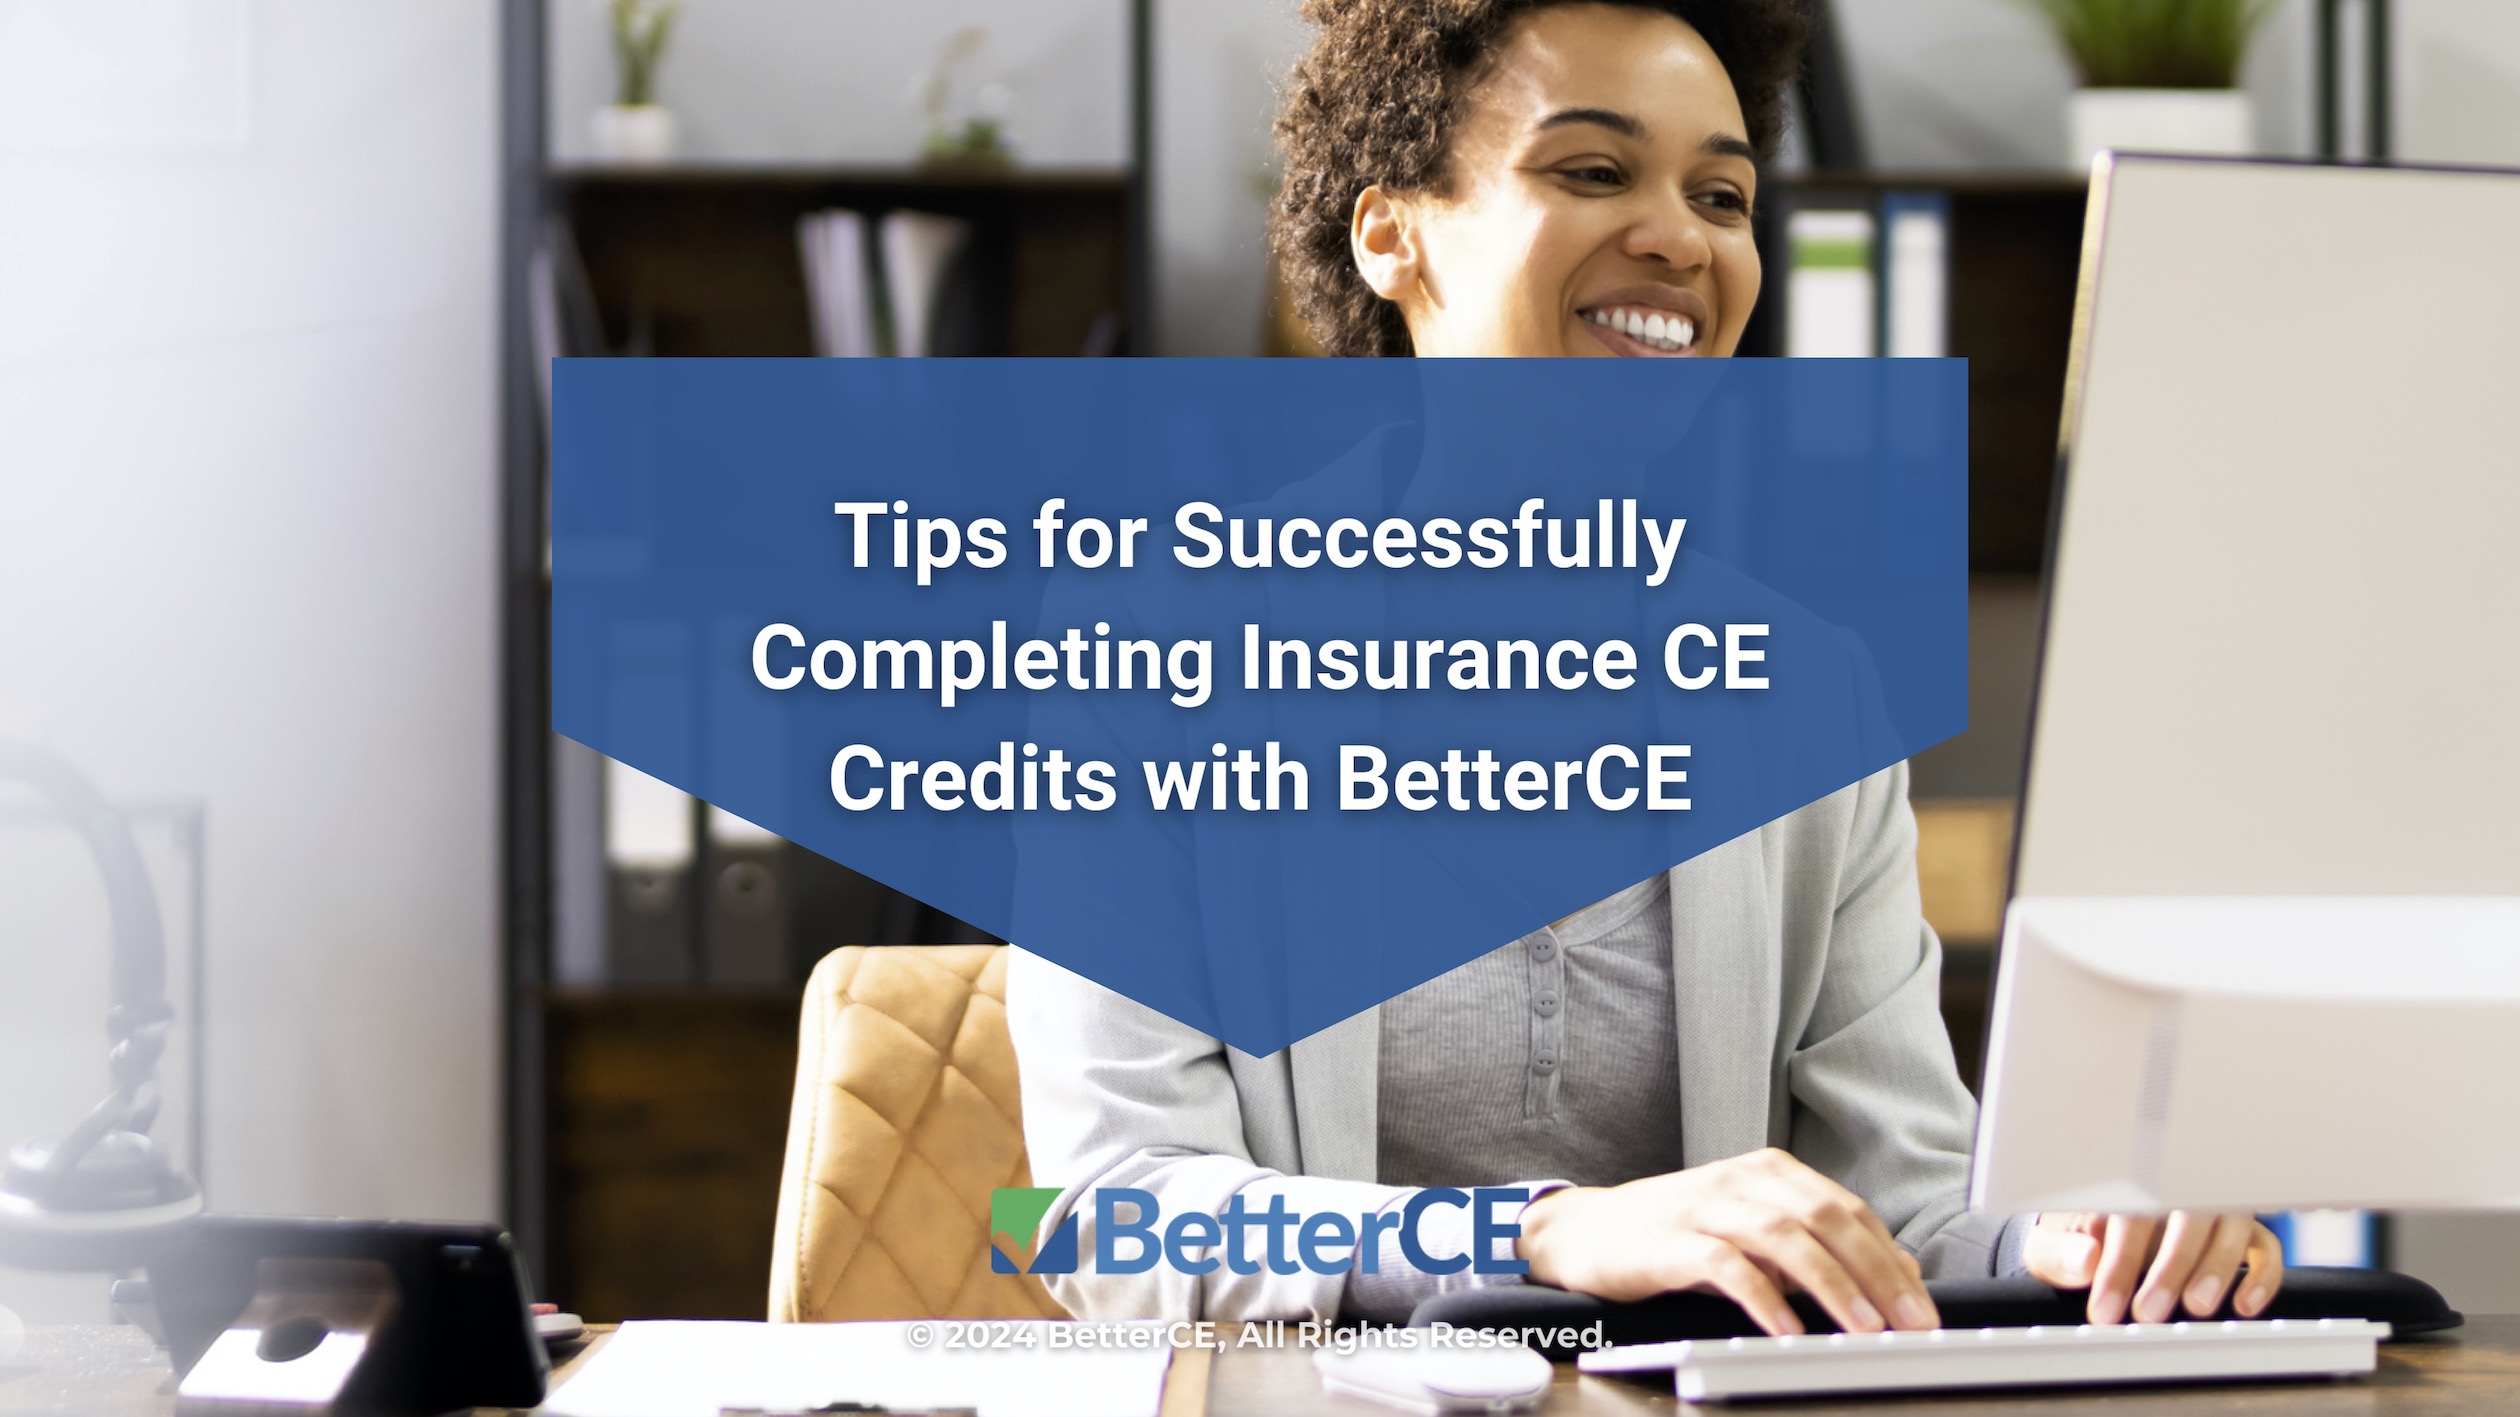 Featured: Female taking online training webinar- Tips for successfully completing insurance CE credits with BetterCE